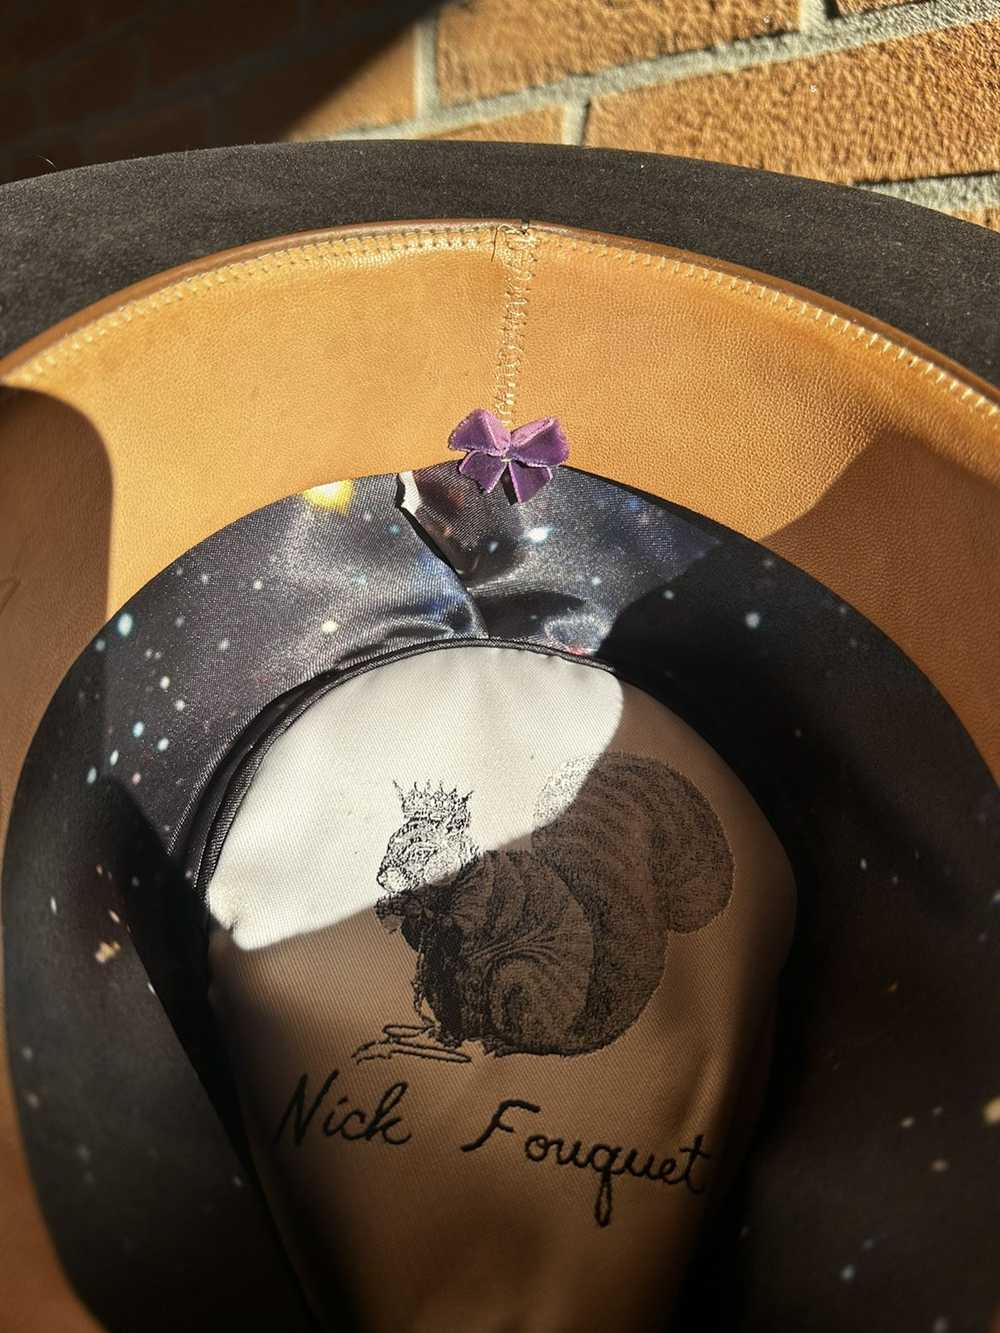 Nick Fouquet Nick Fouquet Hand Made Leather Hats - image 8